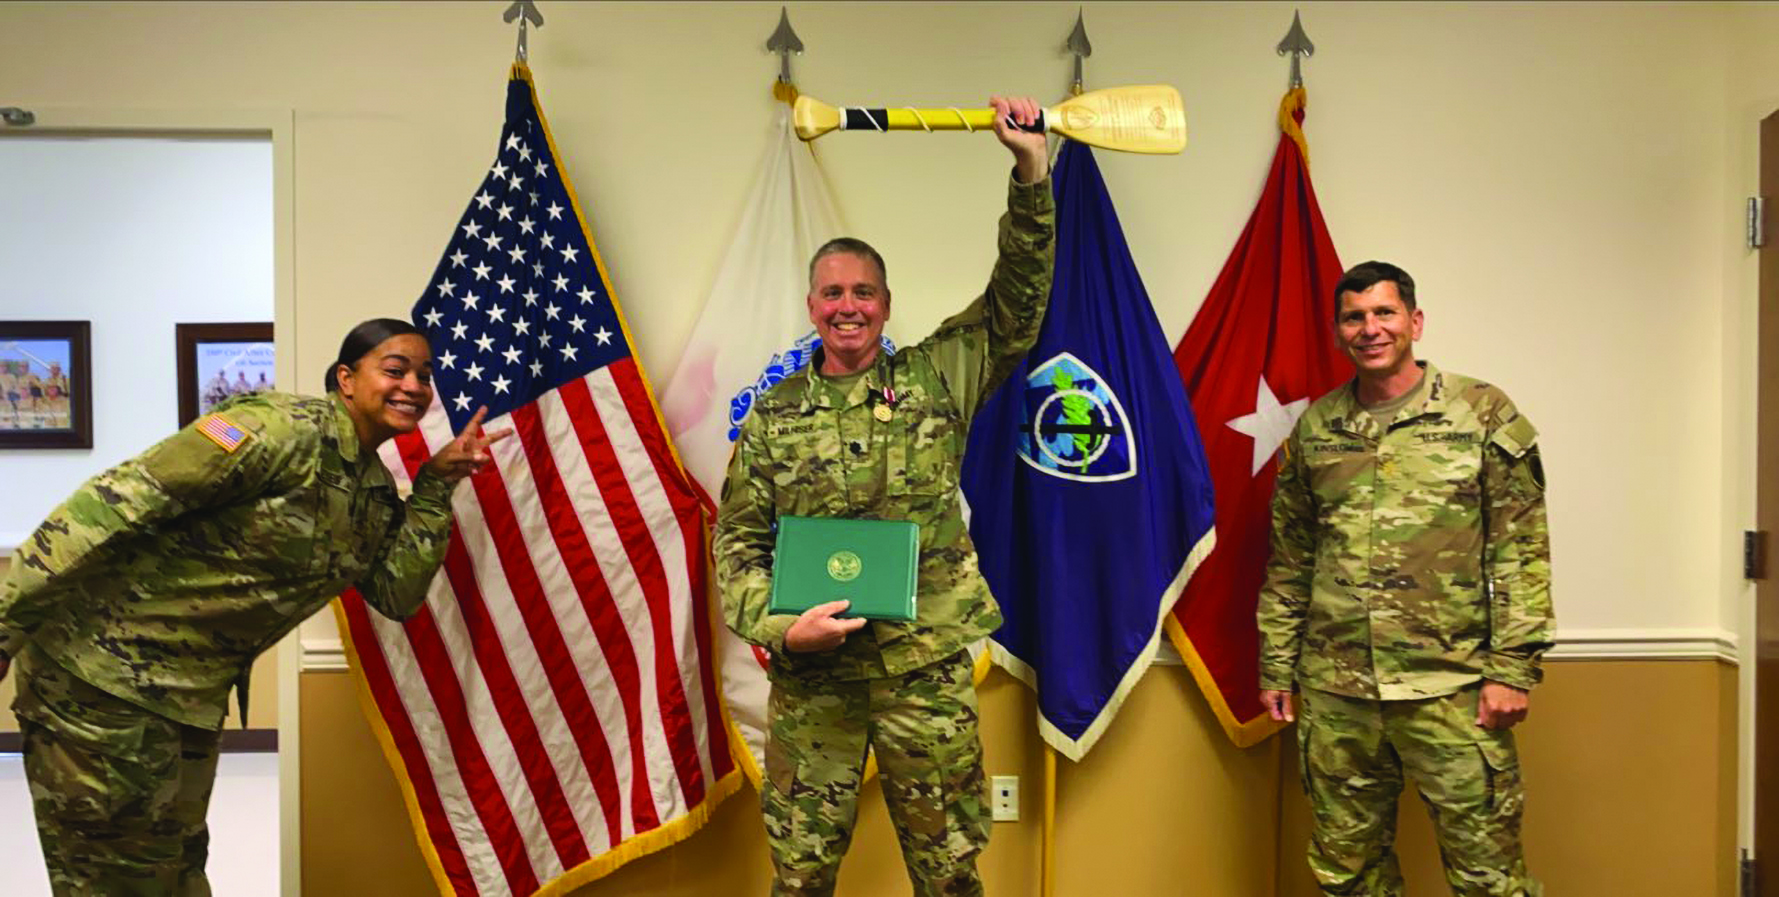 Members of team 350th CACOM OCJA briefly remove their masks, while maintaining social distance, to wish LTC Mark Milhiser a safe departure from Pensacola, Florida, and arrival at the Pentagon. Outgoing CJA, LTC Milhiser poses with the much coveted, and well-earned, 350th CACOM paddle. He is accompanied in the photo by SSG Jacqueline Reyes (left) and MAJ Chris Kinslow (right).